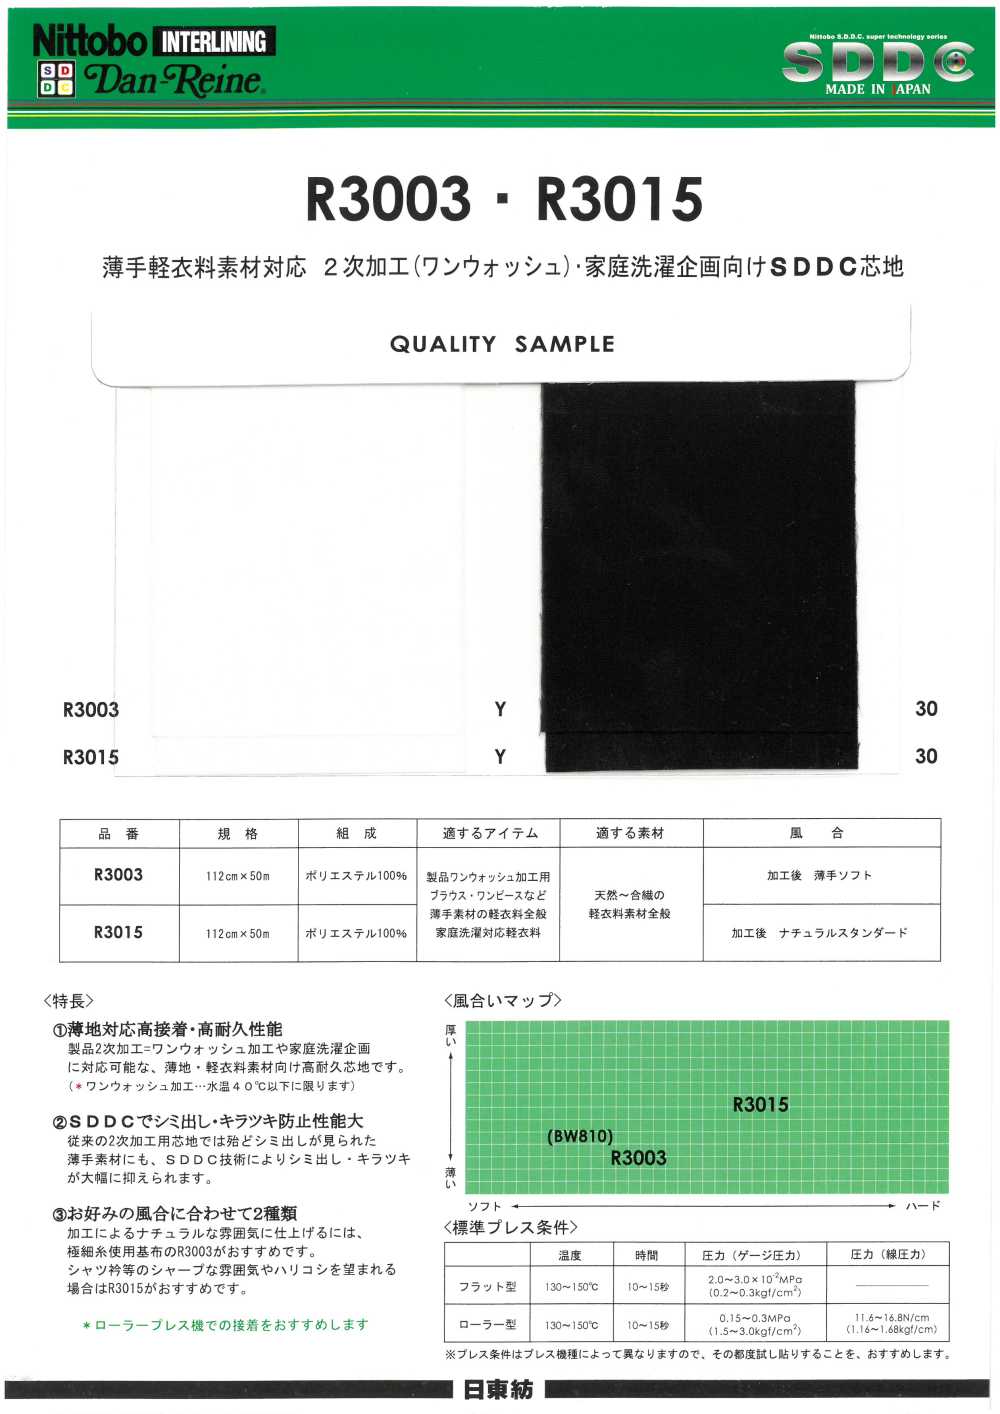 R3015 Dan Reine For Thin And Light Clothing Materials Secondary Processing (One Wash) / SDDC Interlining F Nittobo